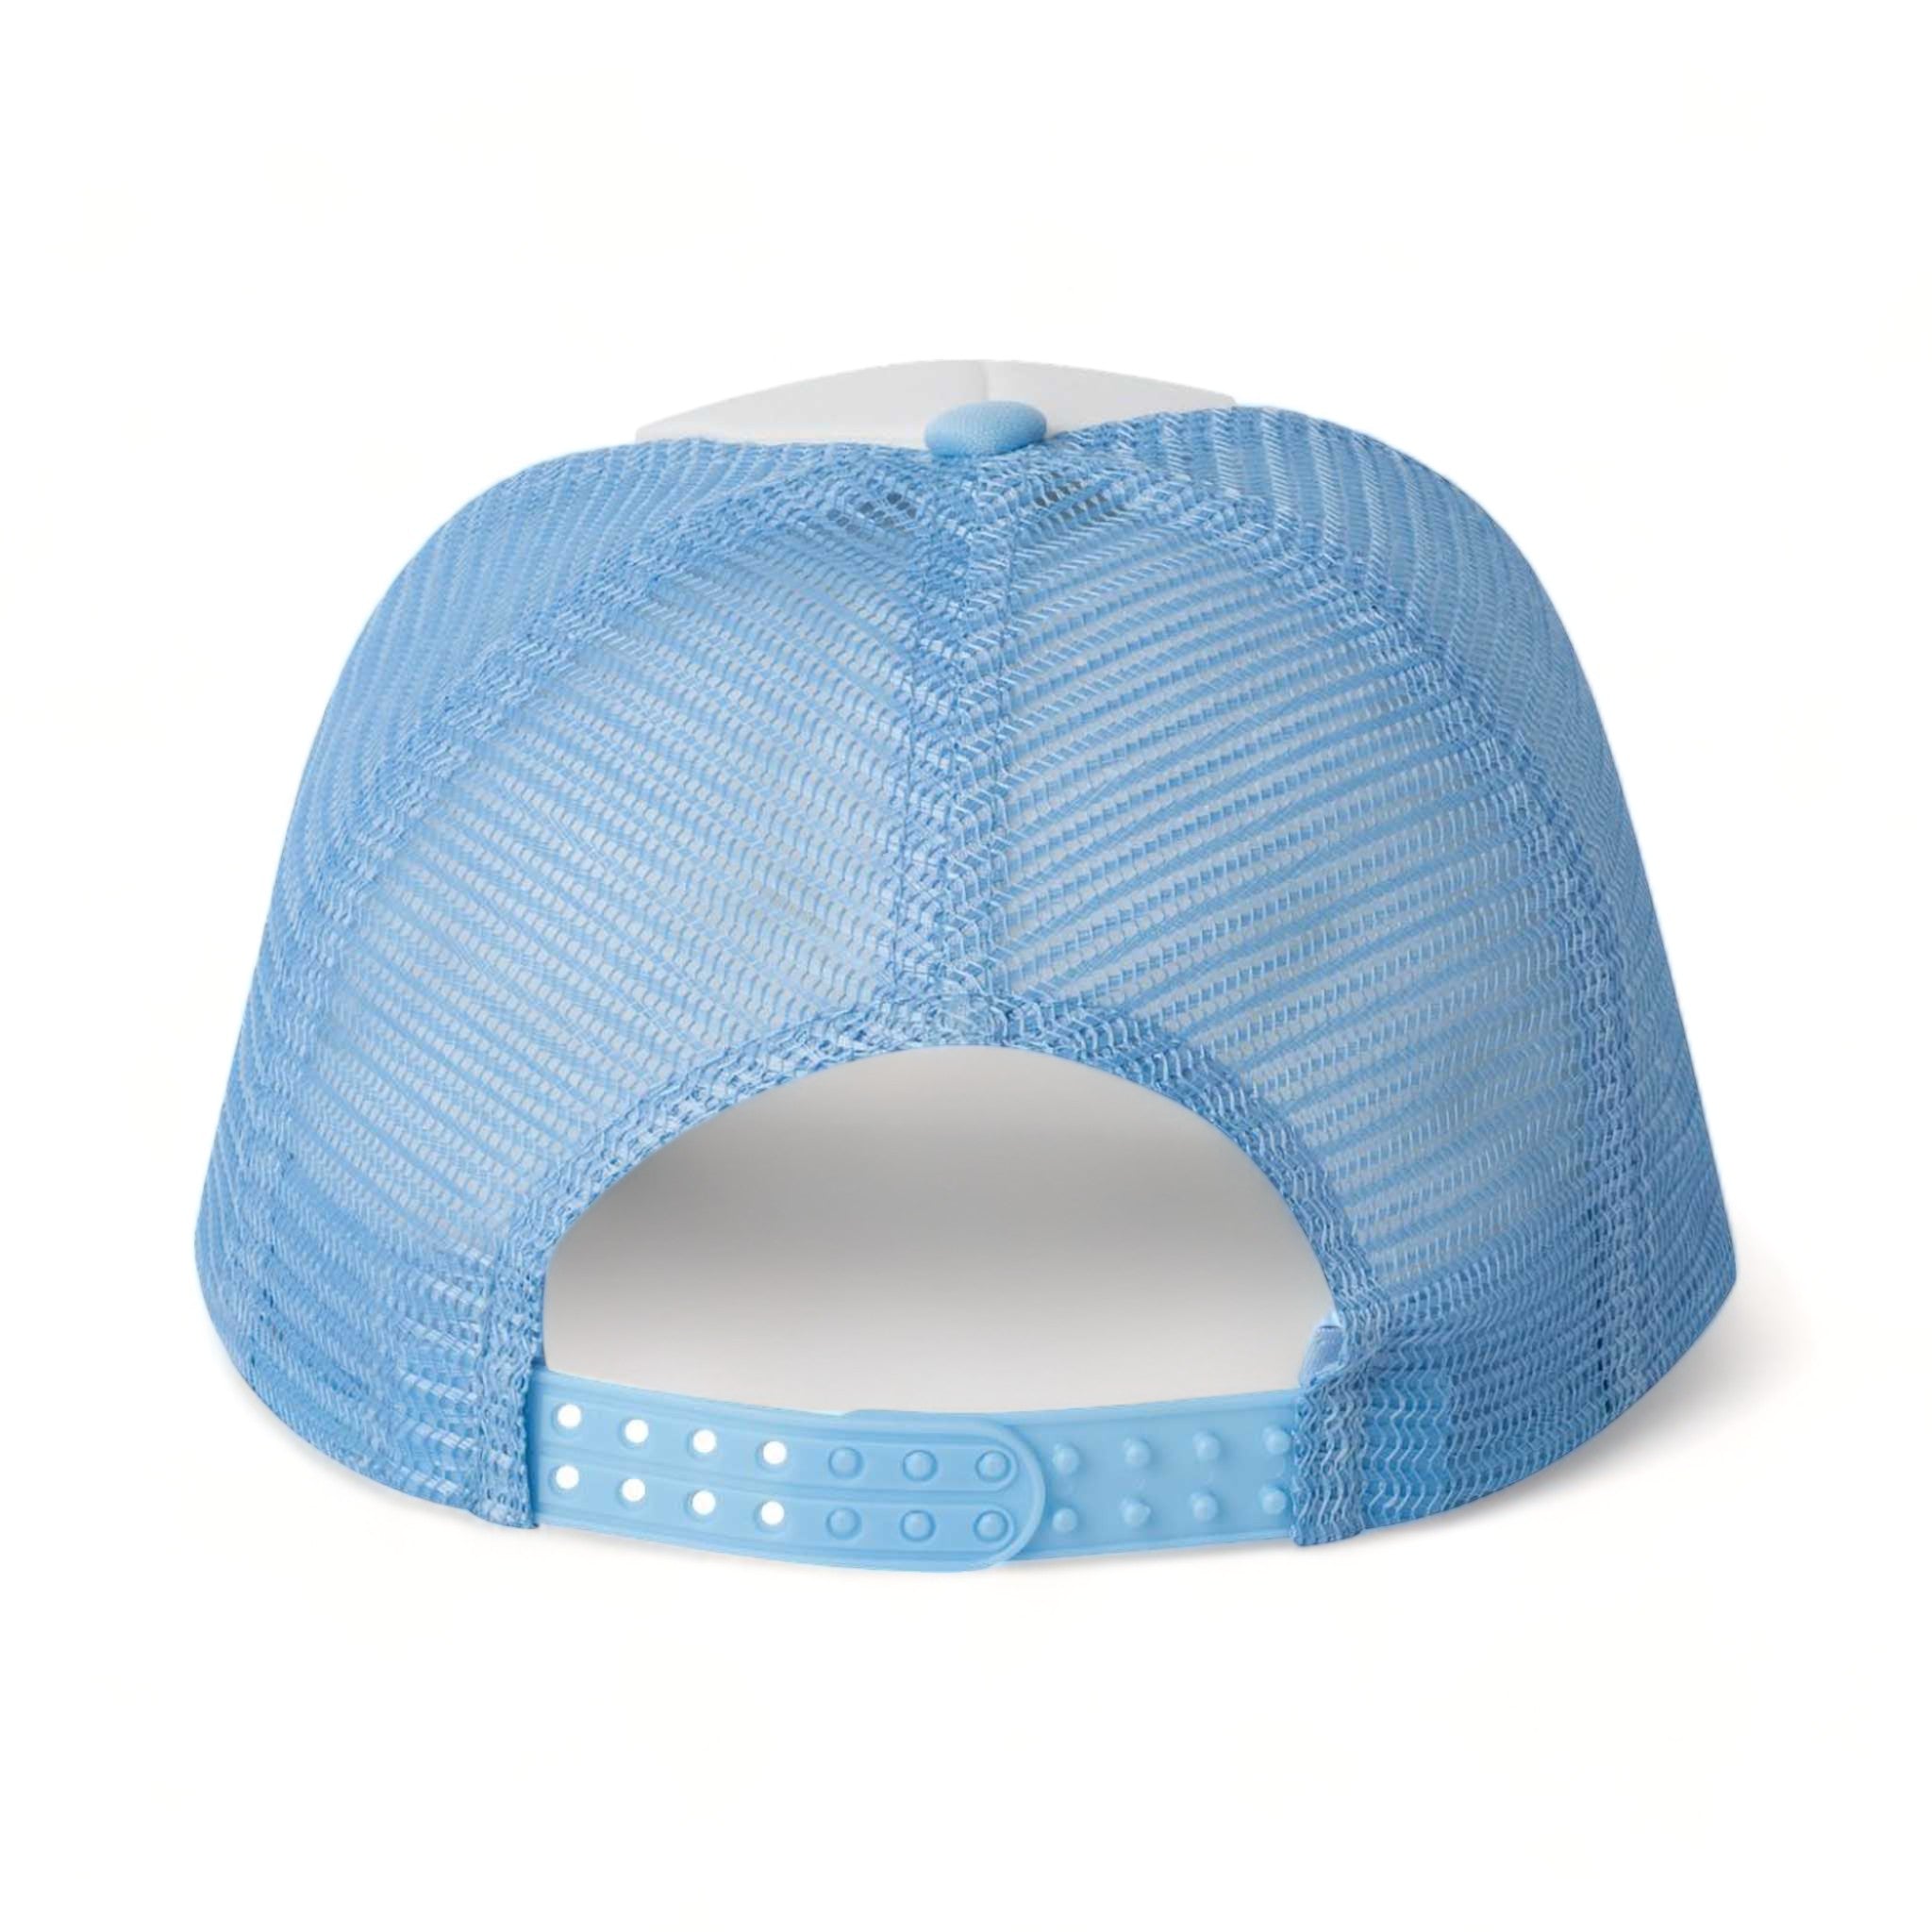 Back view of Valucap VC700 custom hat in white and baby blue